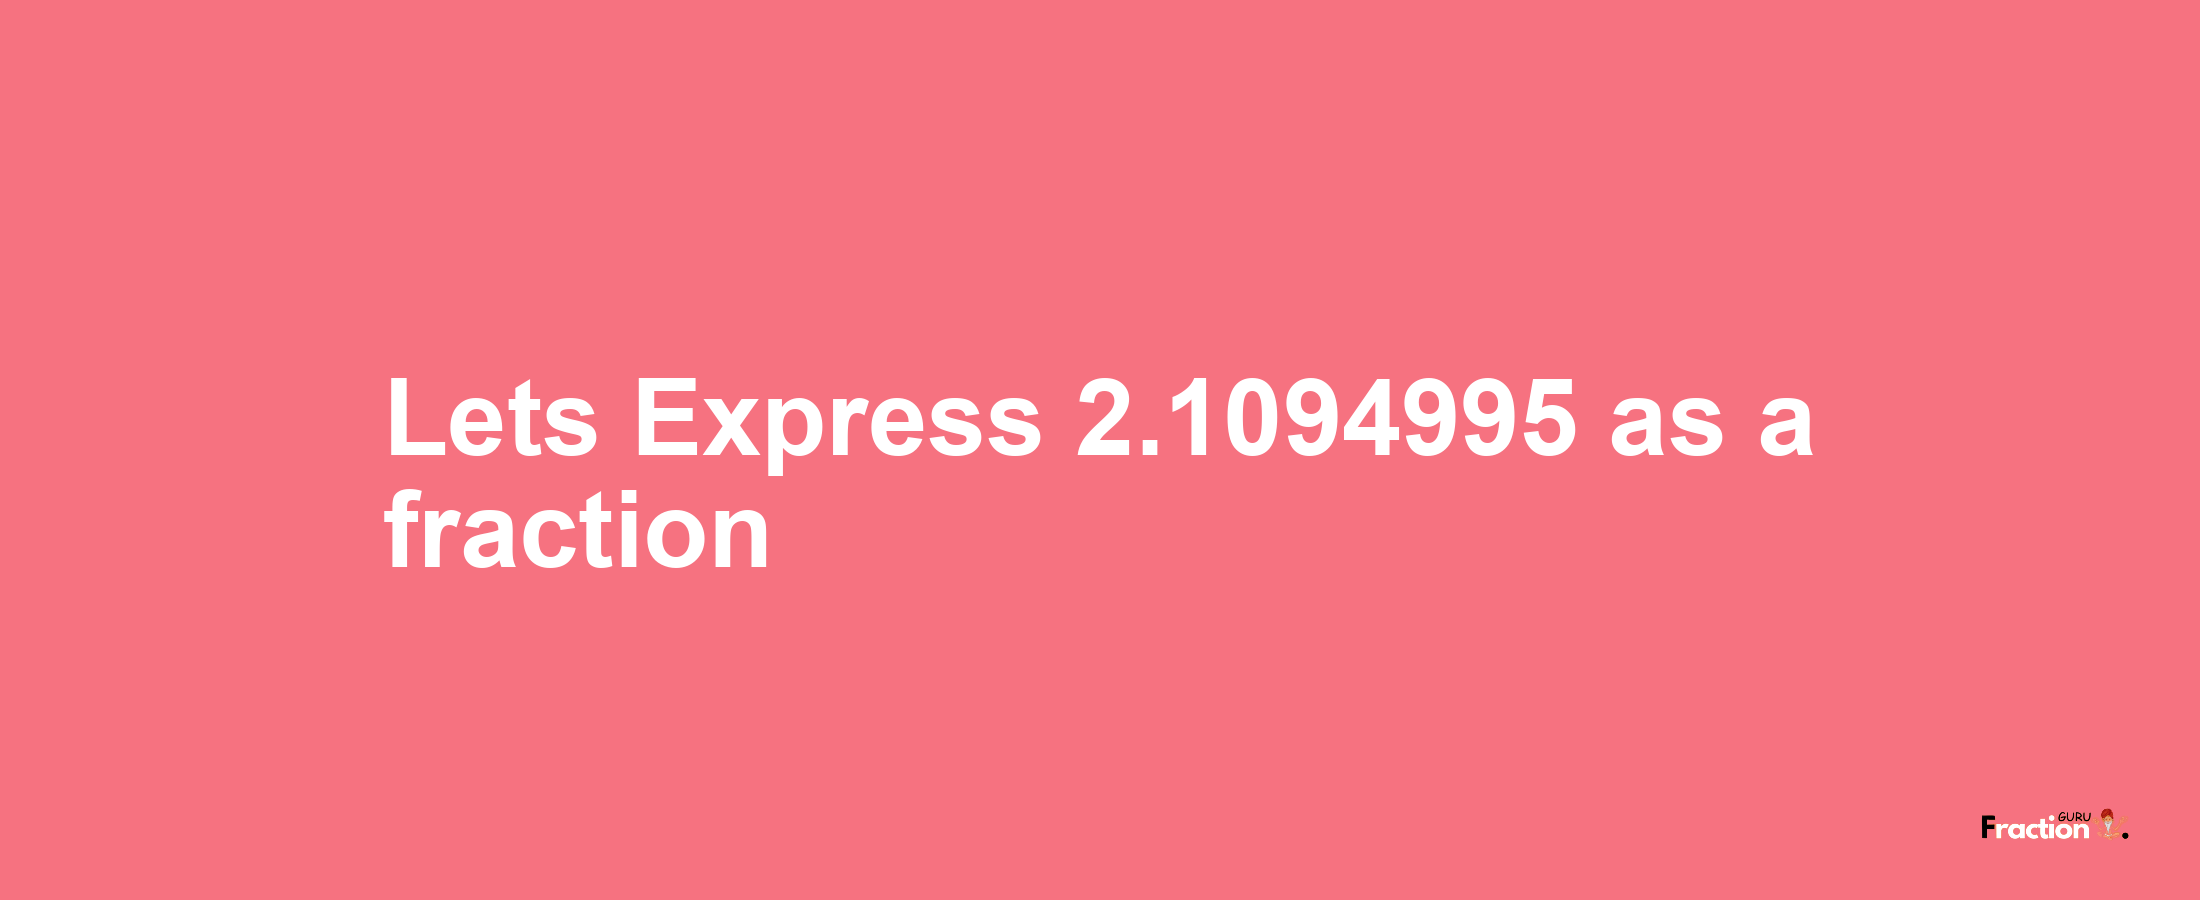 Lets Express 2.1094995 as afraction